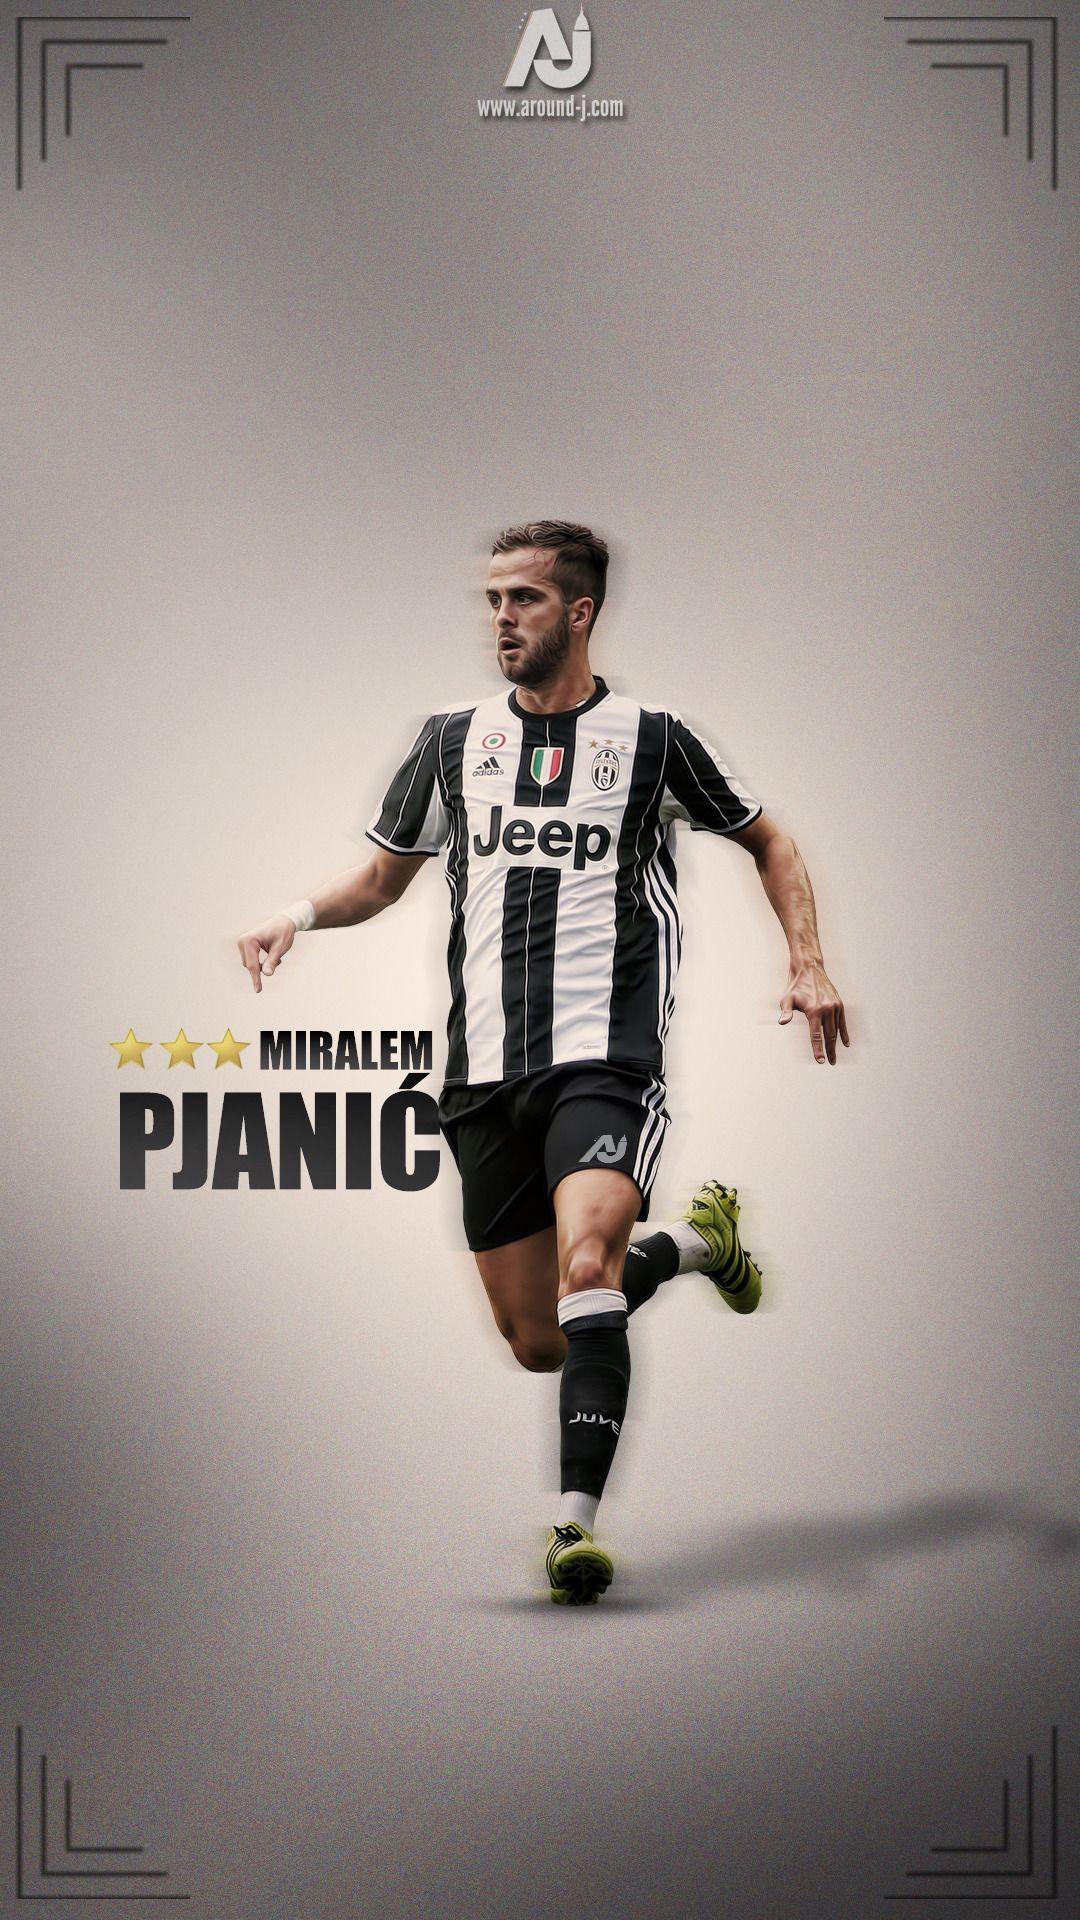 Wallpaper Football, Soccer, AS Roma, Bosnia, Centrocampista, Miralem Pjanic,  Midfield. Dribling images for desktop, section спорт - download